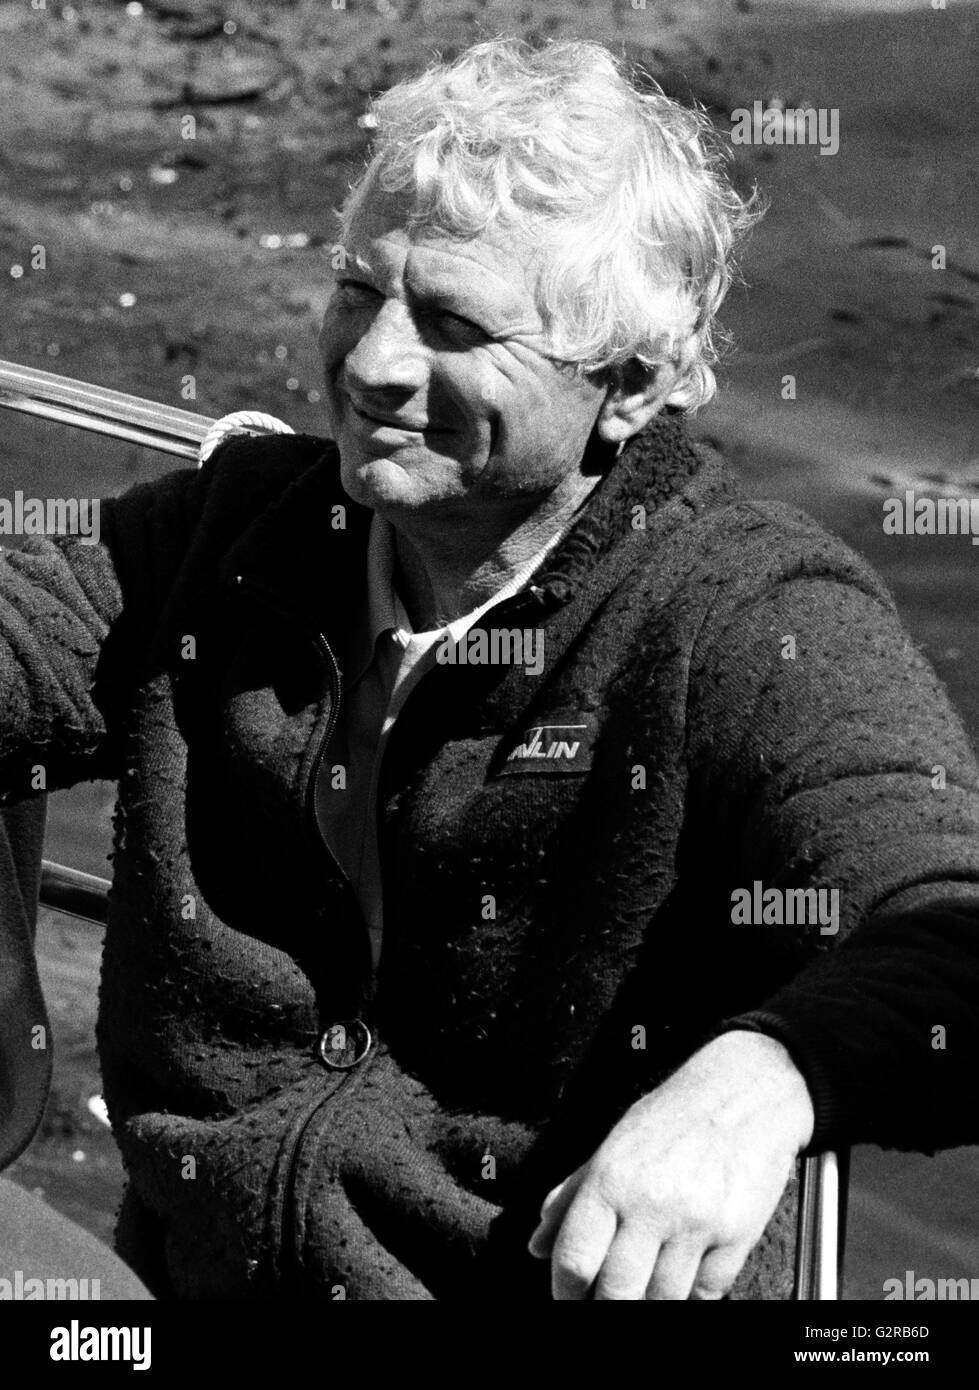 AJAXNETPHOTO. 17TH AUGIST, 1979. PLYMOUTH, ENGLAND. - FASTNET END - RAGS SKIPPER - SY FISCHER ON RAGAMUFFIN ON ARRIVAL IN MILBAY. PHOTO:JONATHAN EASTLAND/AJAX. REF:2791508 2 Stock Photo